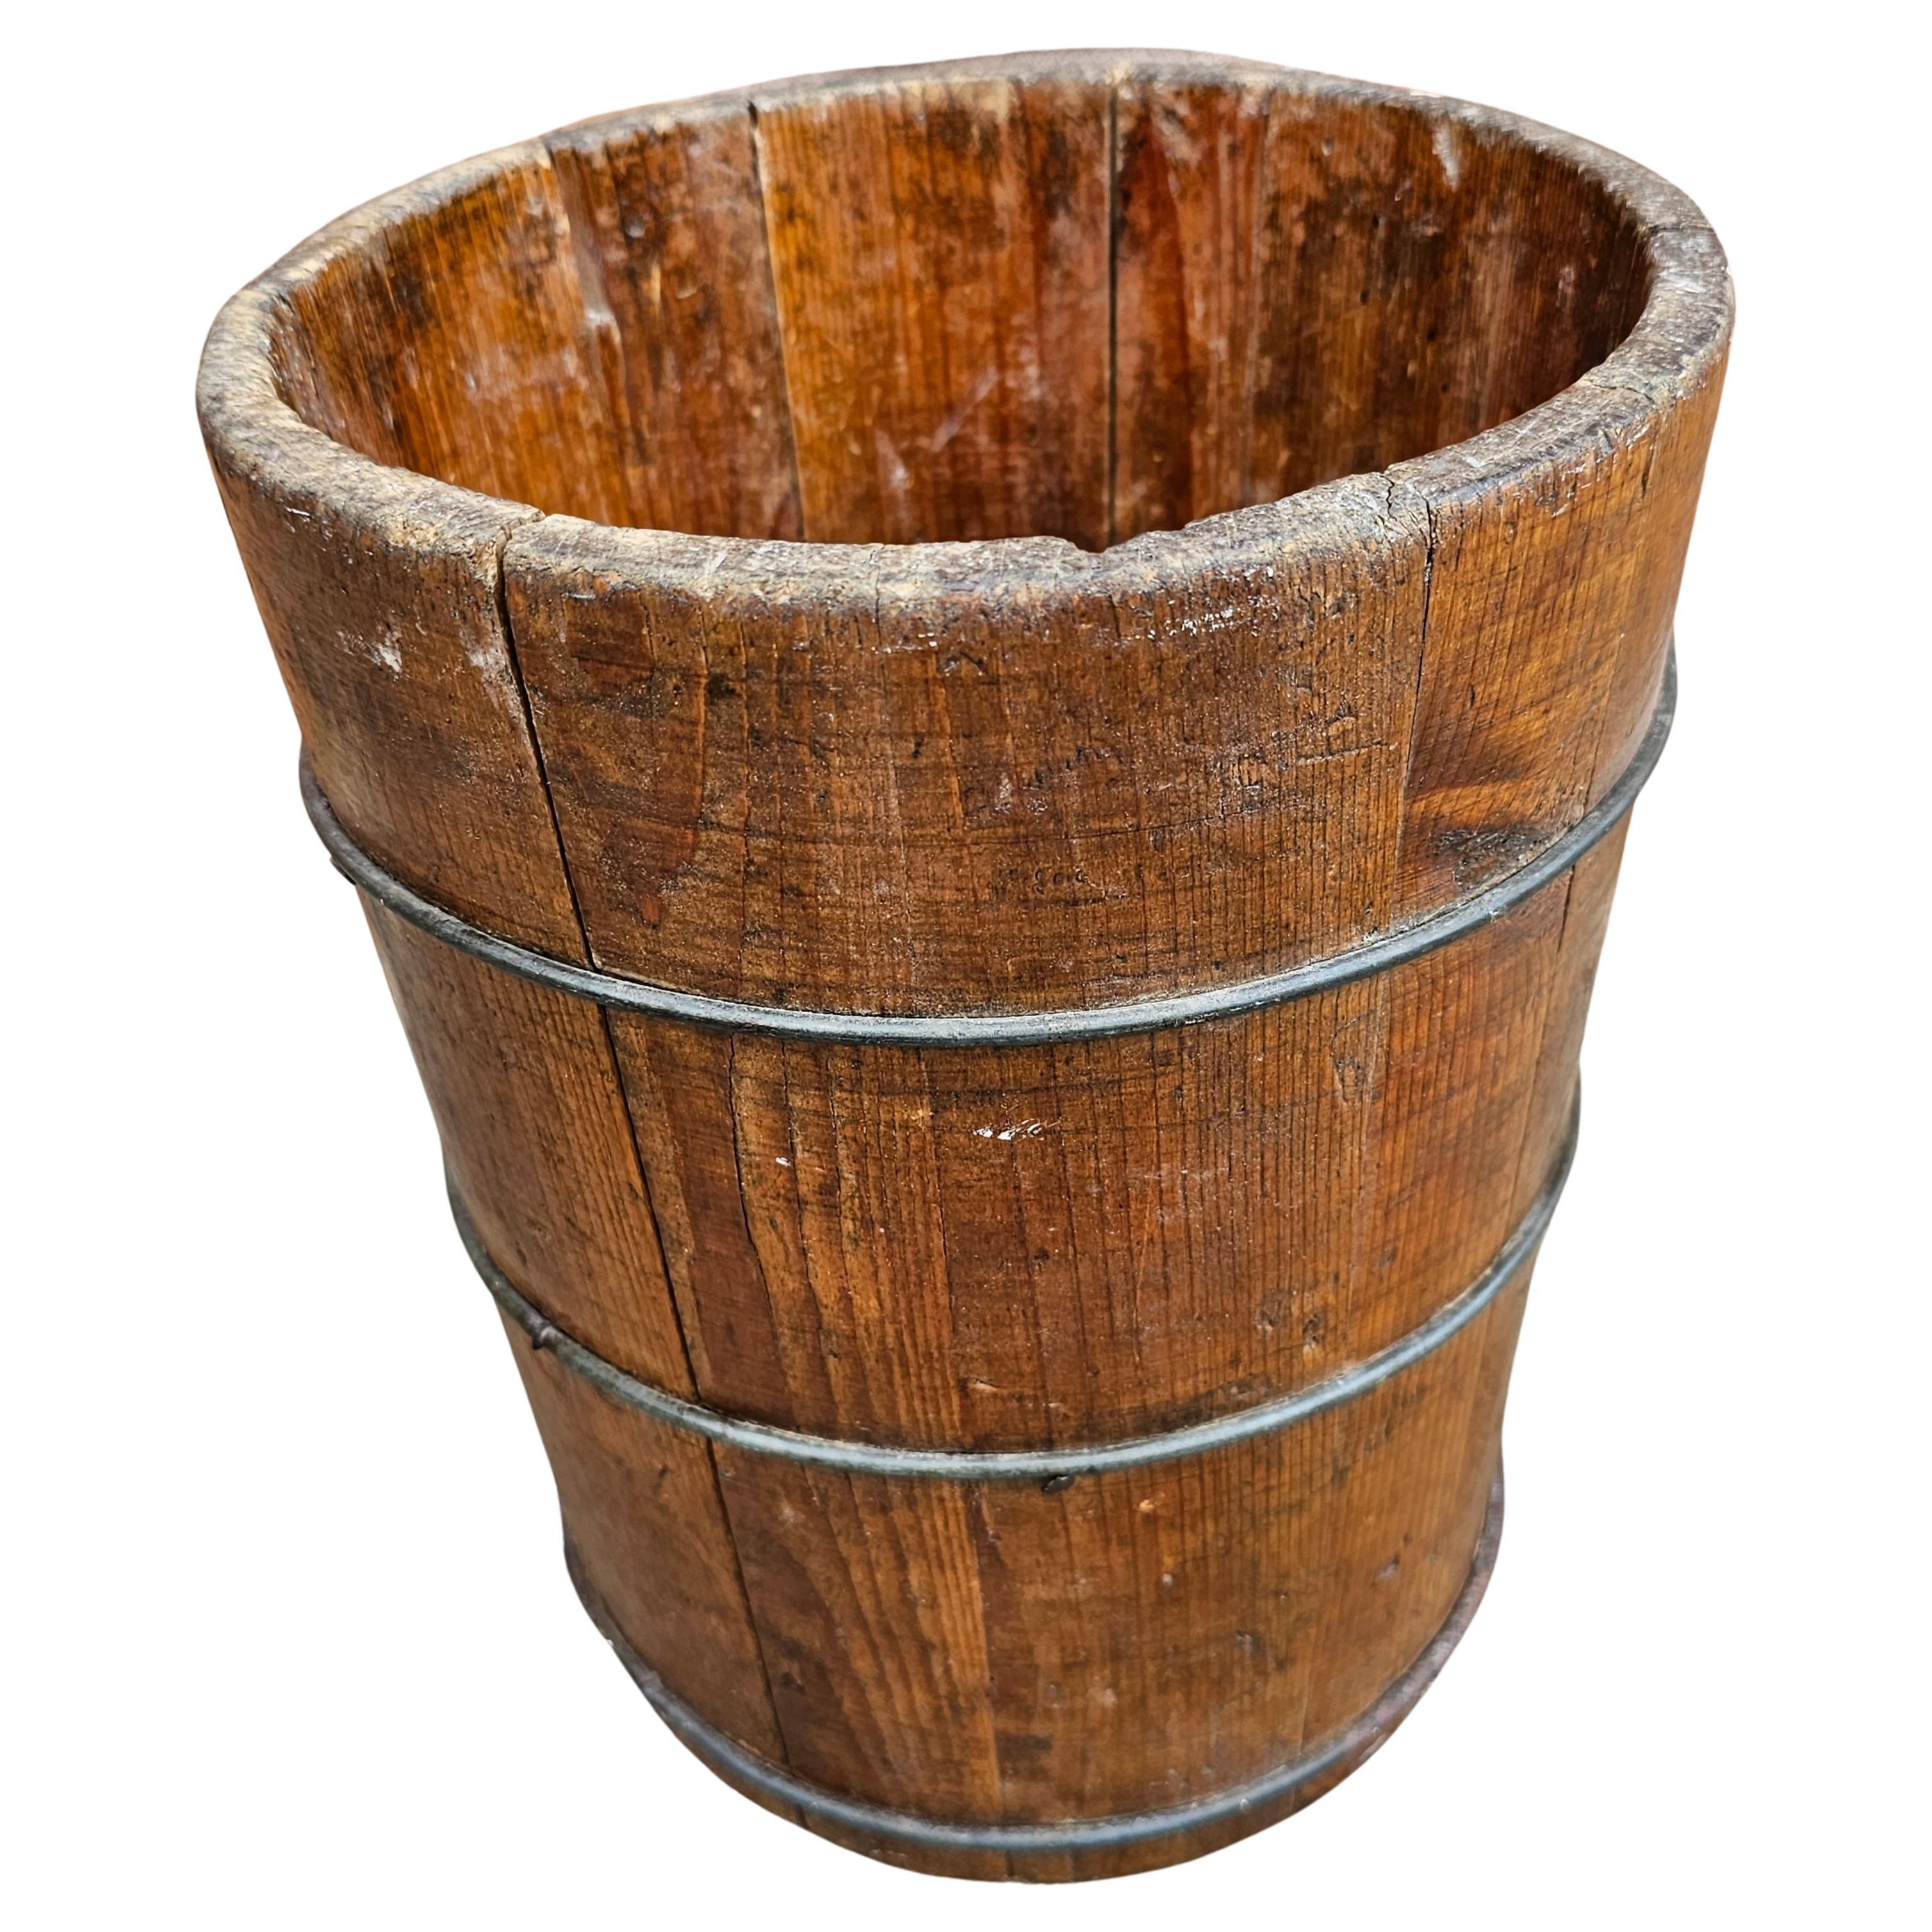 19th Century Handcrafted Turned Wooden Bail Bucket, Nowadays Planter For Sale